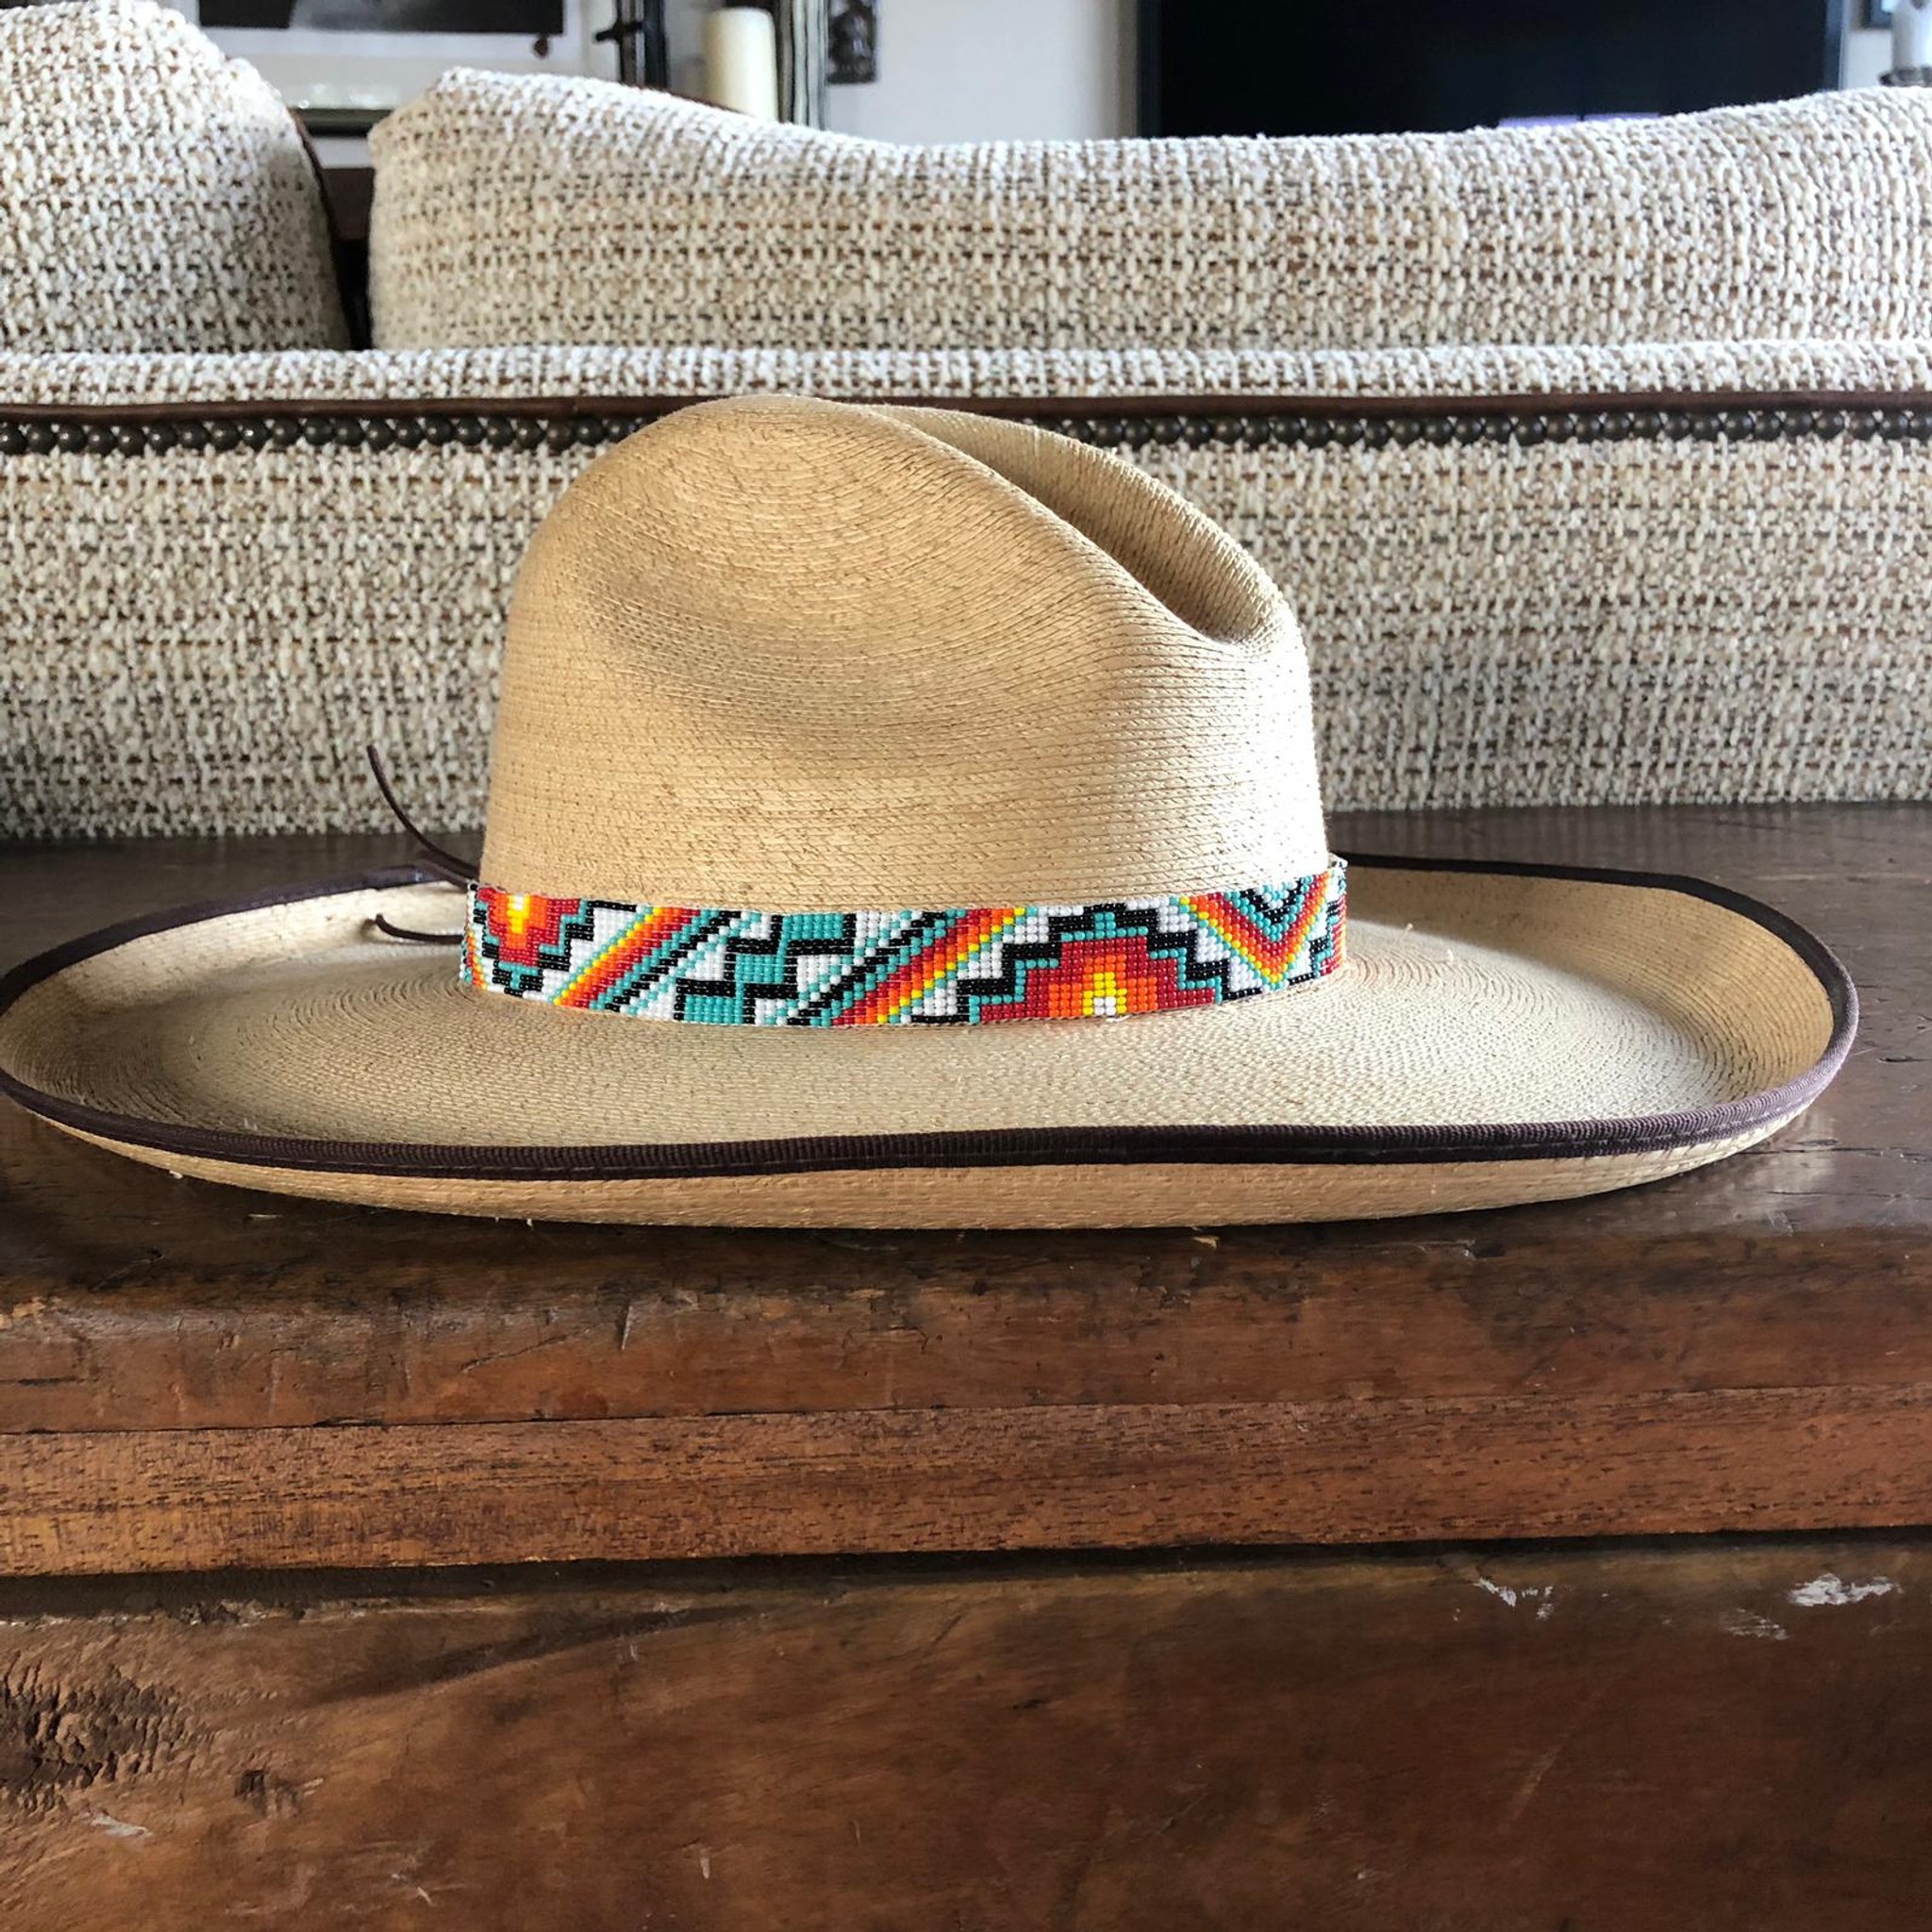  Handmade Western Cowboy Hatband with Silver, Turquoise, Thin  Black Horn Hairpipe bead hat band, Handmade, For Men or Women, Cowgirl or Cowboy  Hatband : Handmade Products